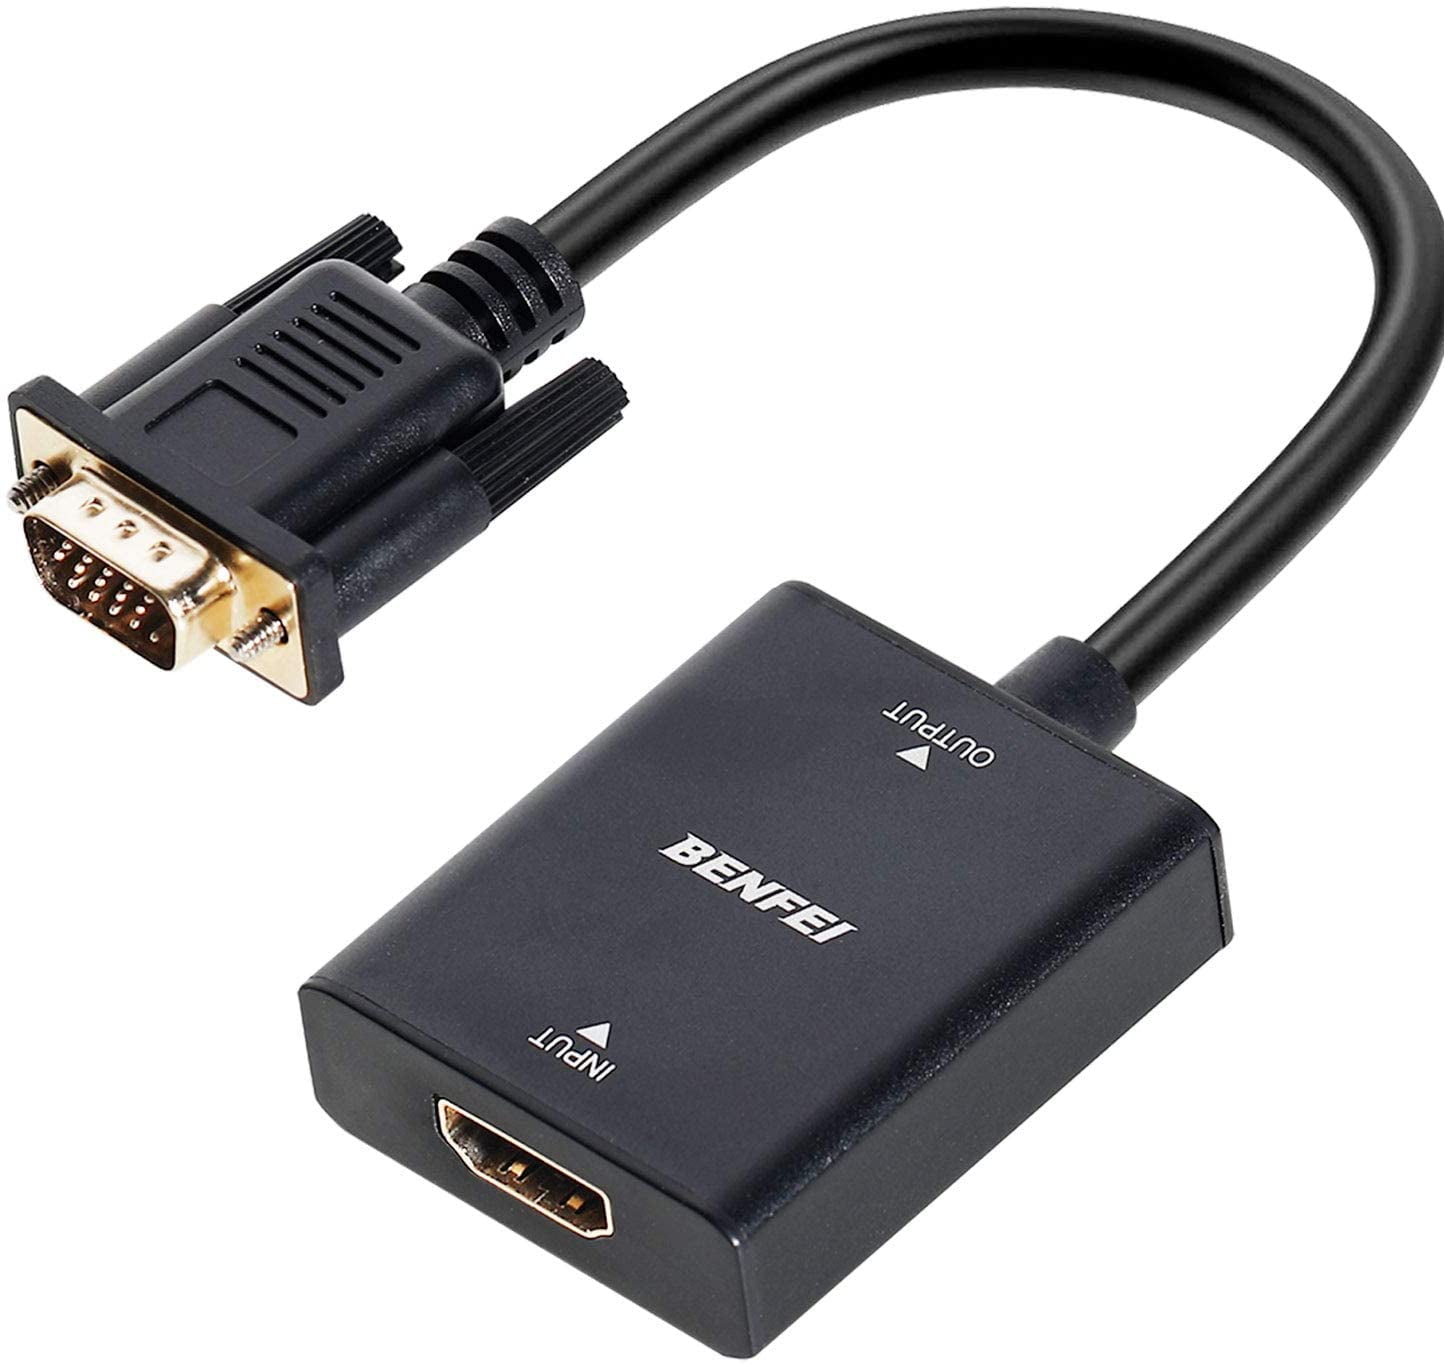 VGA Cable Cord for Laptop Computer PC to TV Monitor 